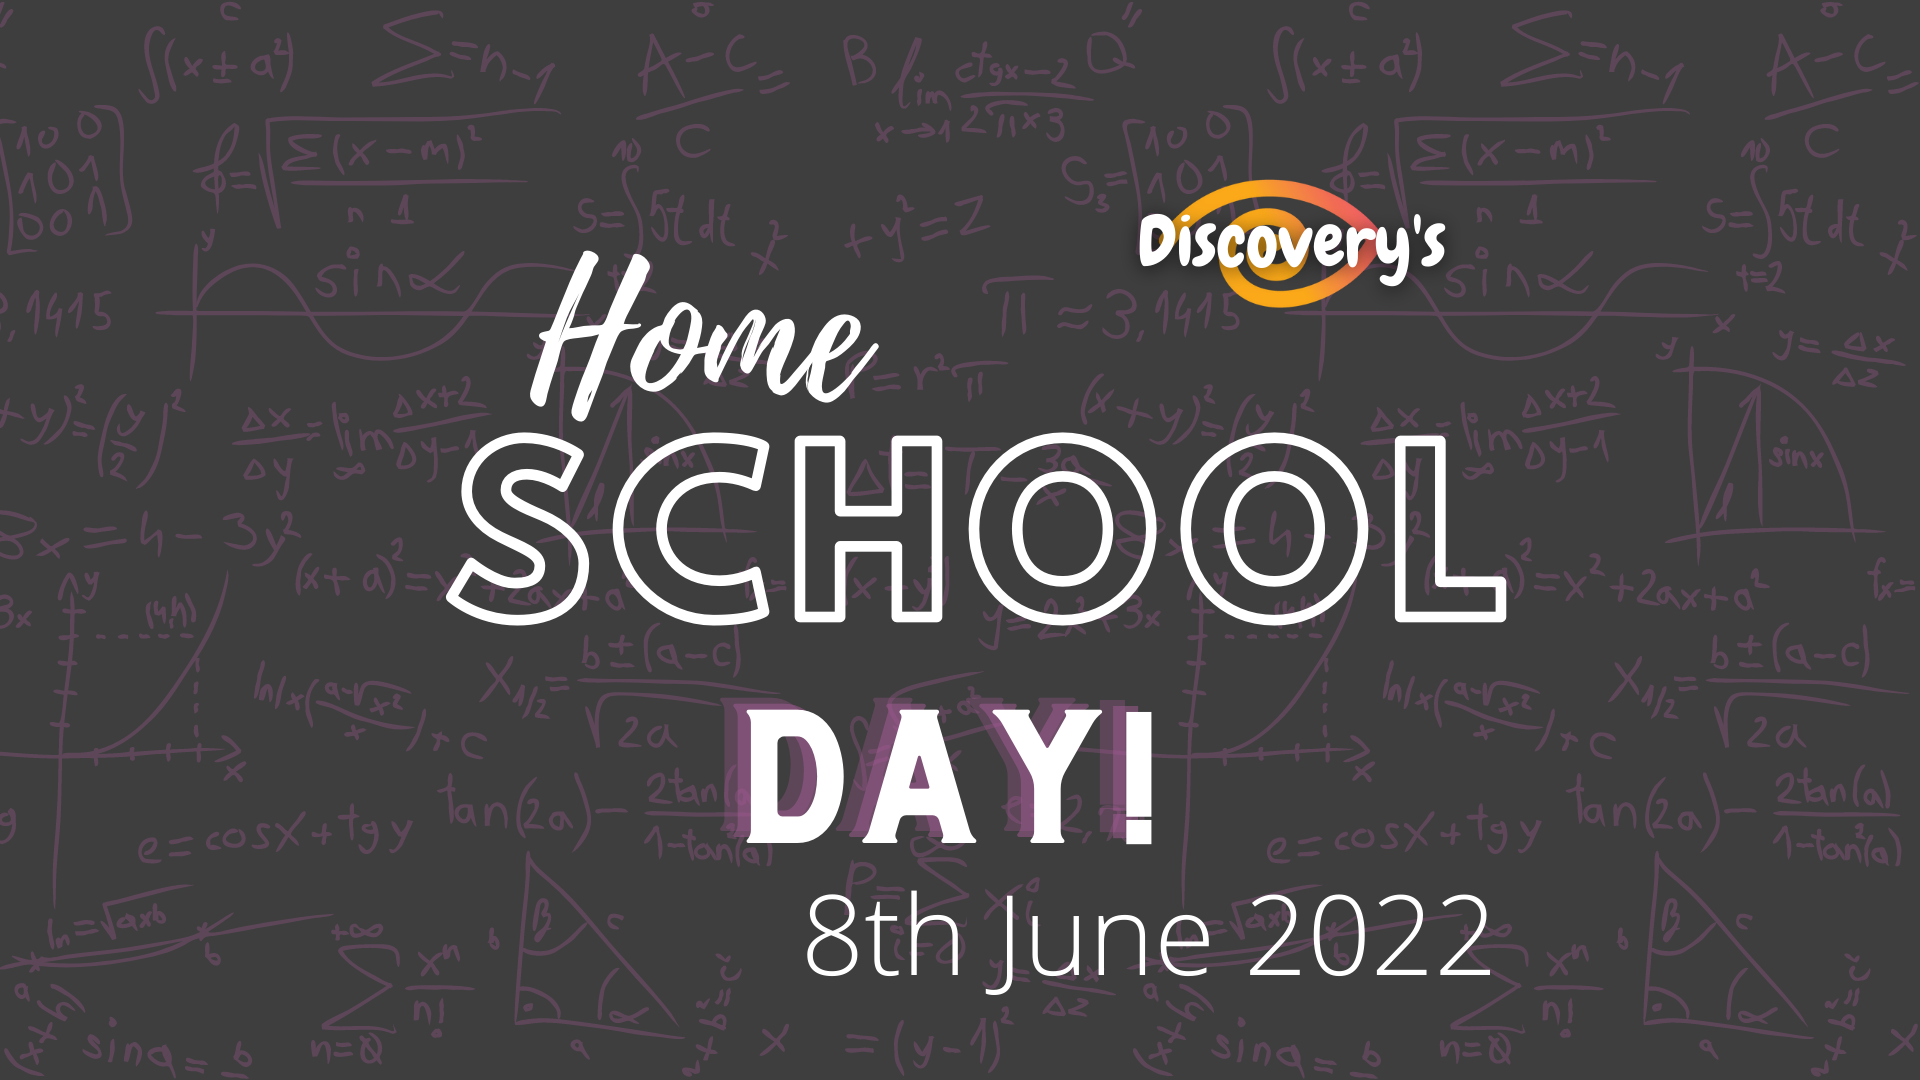 Home School Day 2022!